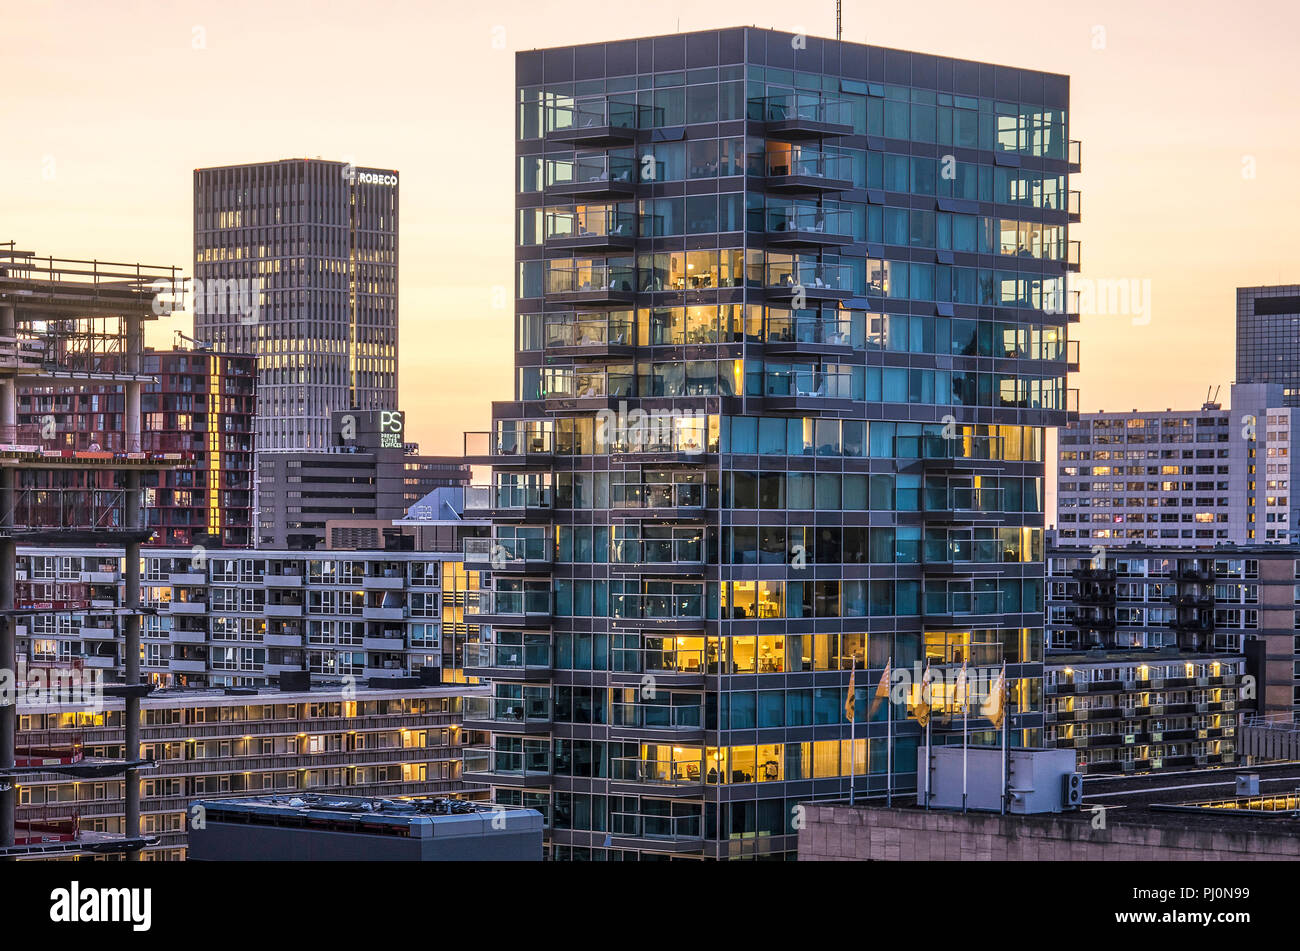 Rotterdam, The Netherlands, August 31, 2018: the B'tower residential building by architect Wiel Arets (2012) with its transparent glass facades at dus Stock Photo